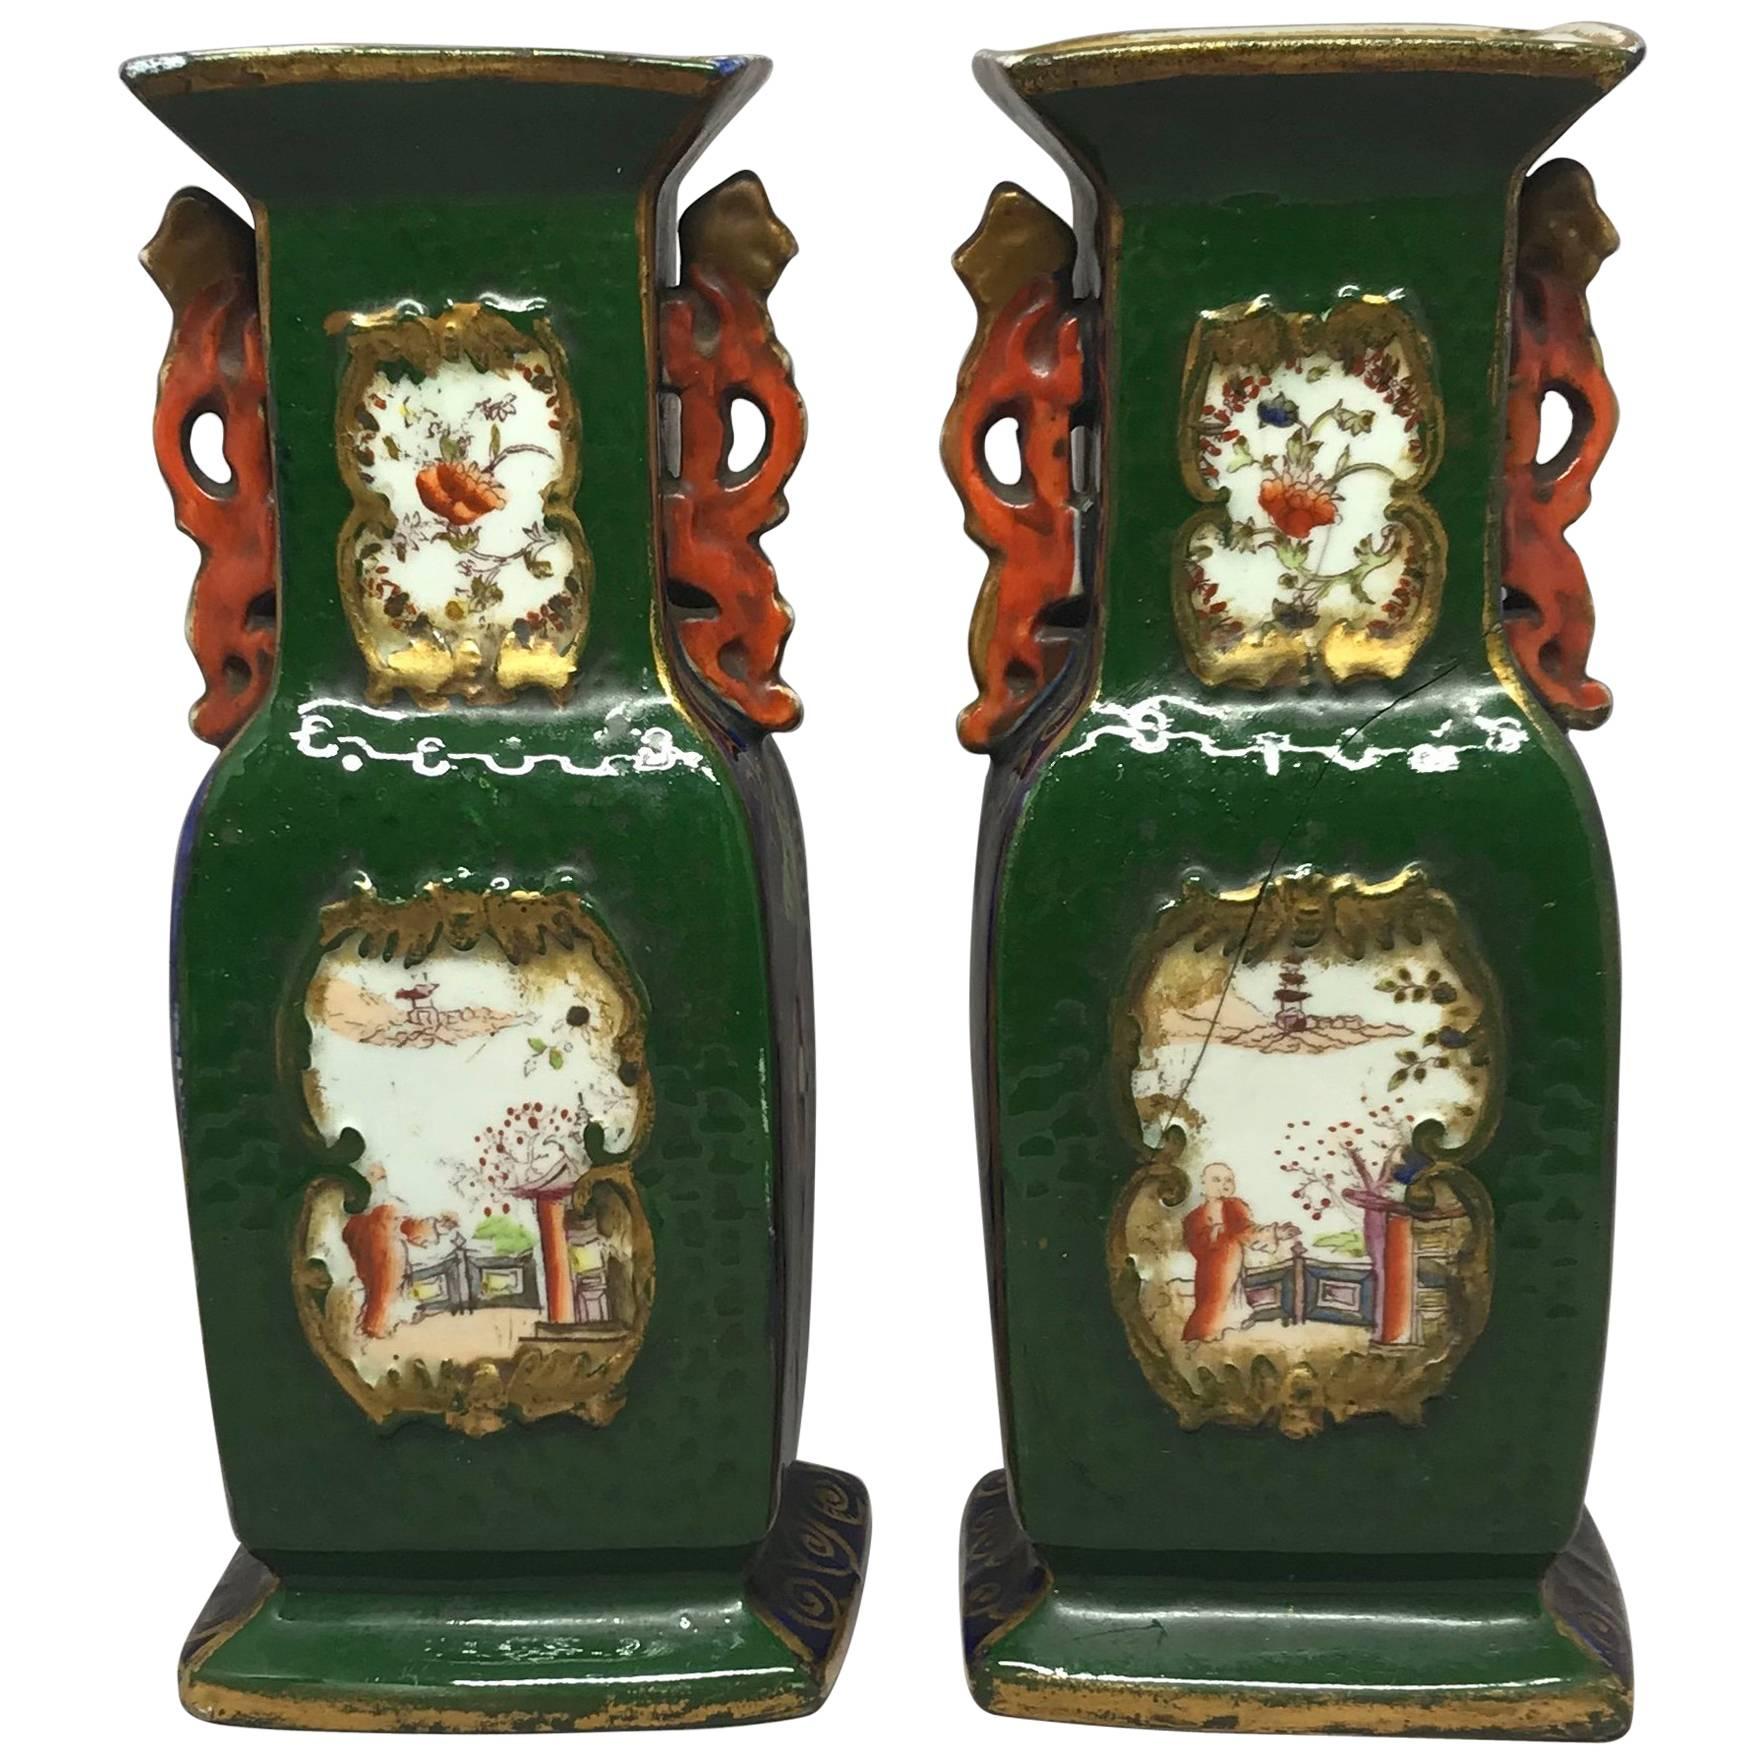 Pair of Green English Vases in the Chinese Style